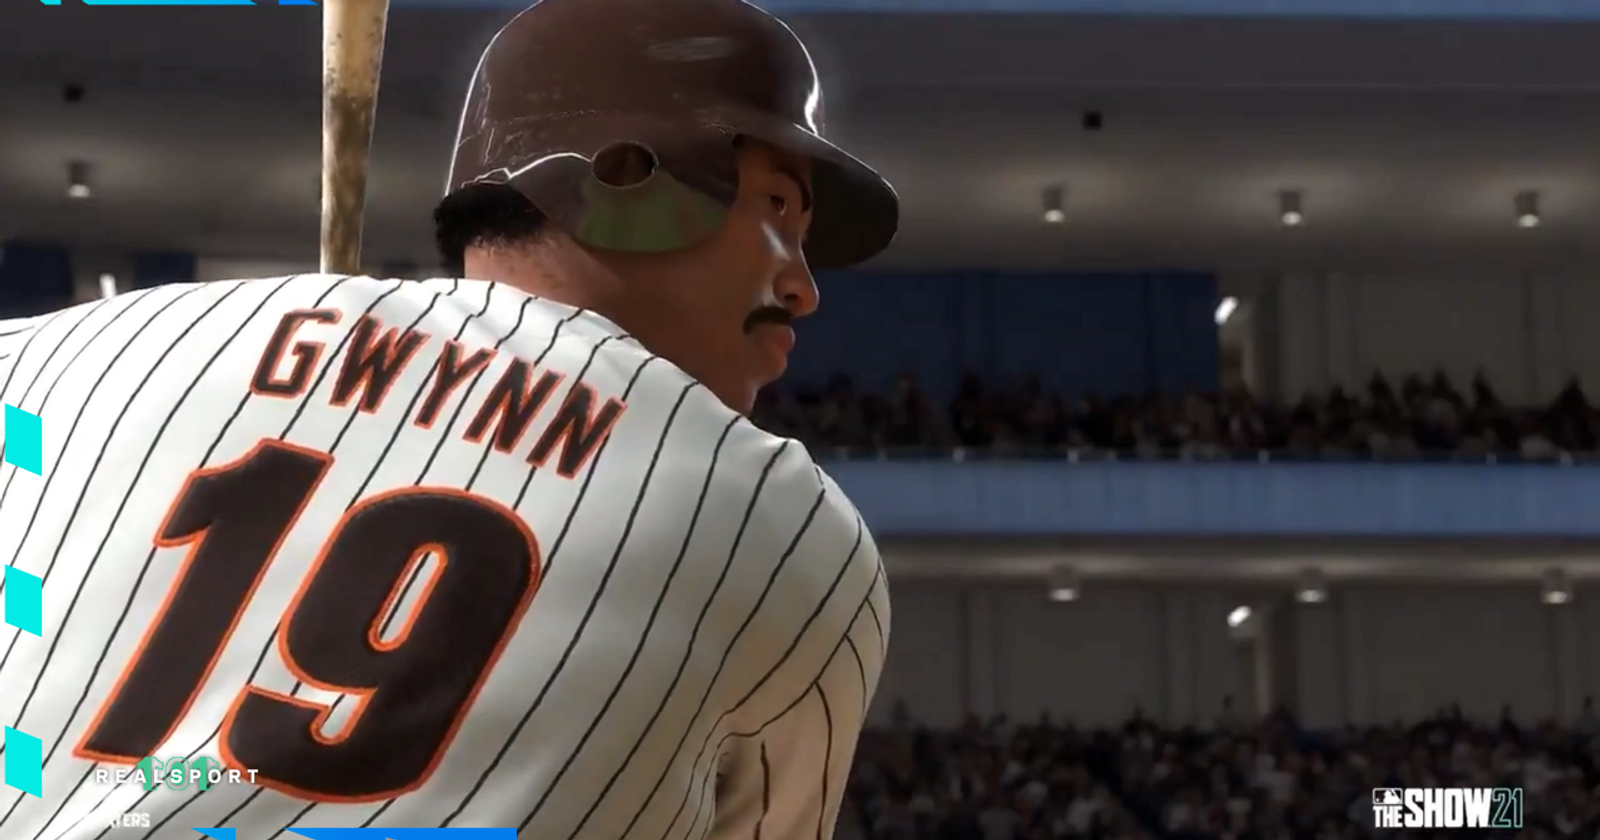 MLB® The Show™ - Past and Future Collide in the 7th Inning Program